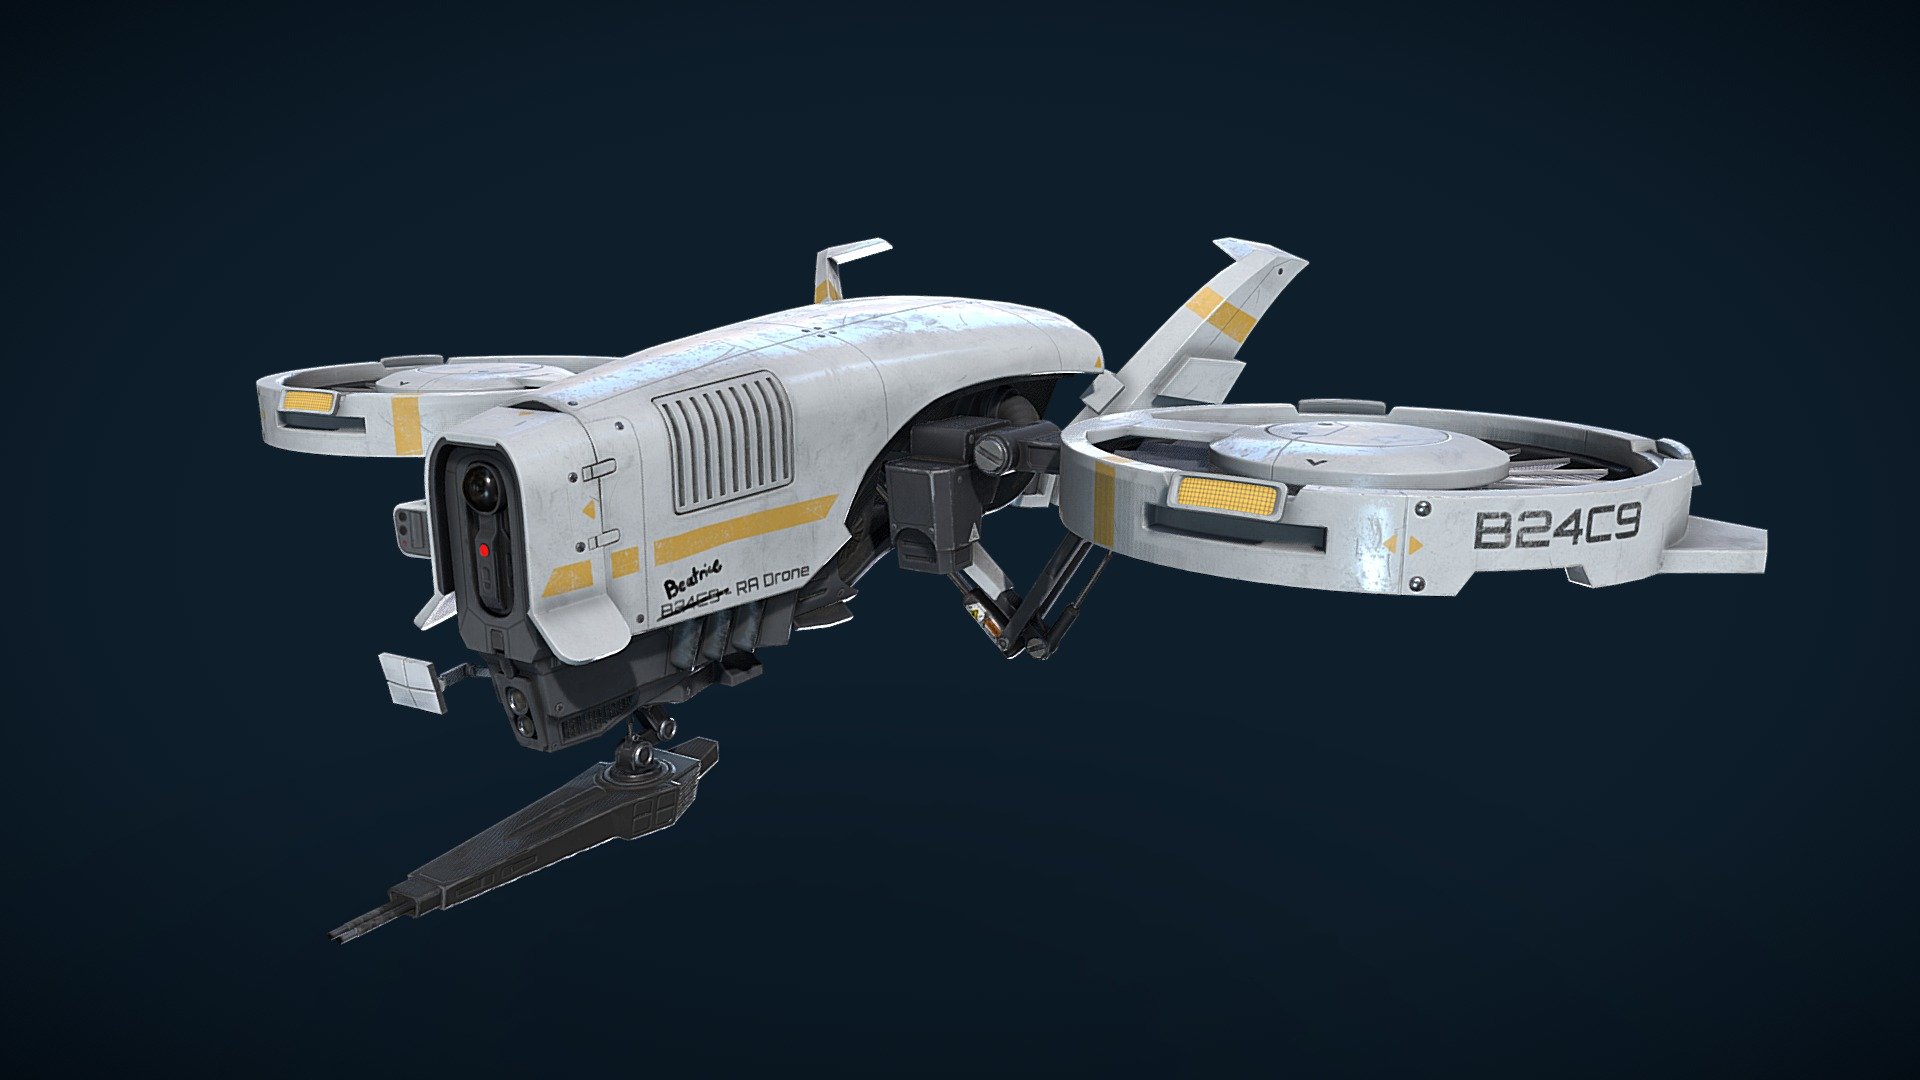 This is my final assignment for the GAP course at DAE.

Task was to make an item that suits the theme of mercenary hideout. I chose to make an assault drone and personalize it.

Modelling and Unwrapping was done in maya and ZBrush, Texturing in Substance Painter.

Original Concept by Ewa Labak: https://www.artstation.com/artwork/1WLy2 - Armed Duocopter Drone - 3D model by Dennis Skodda (@SirSmitz) 3d model